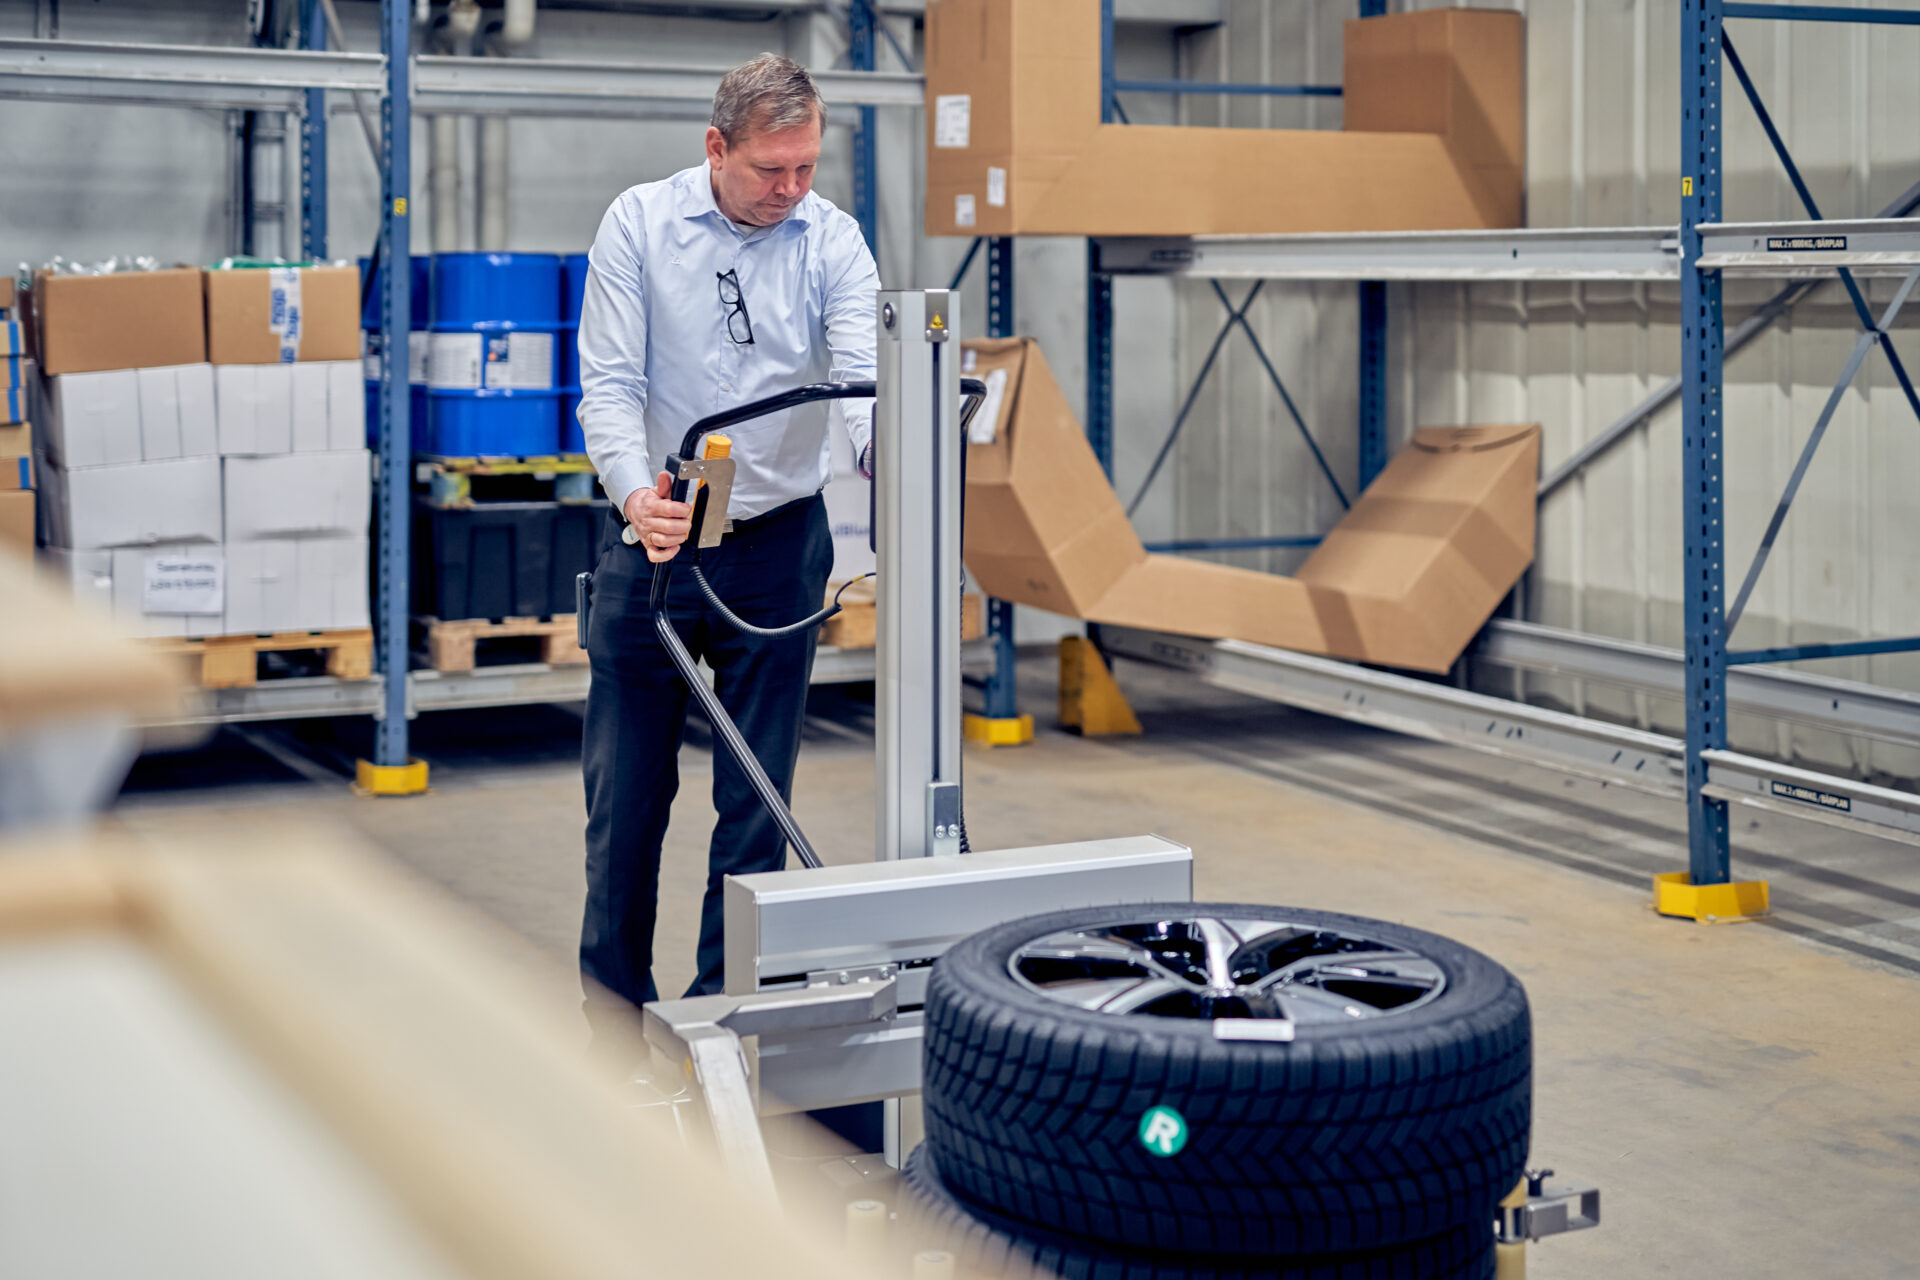 TAWI Lifting Trolley customized for lifting wheels and creating a sustainable process at Bilia Sisjön